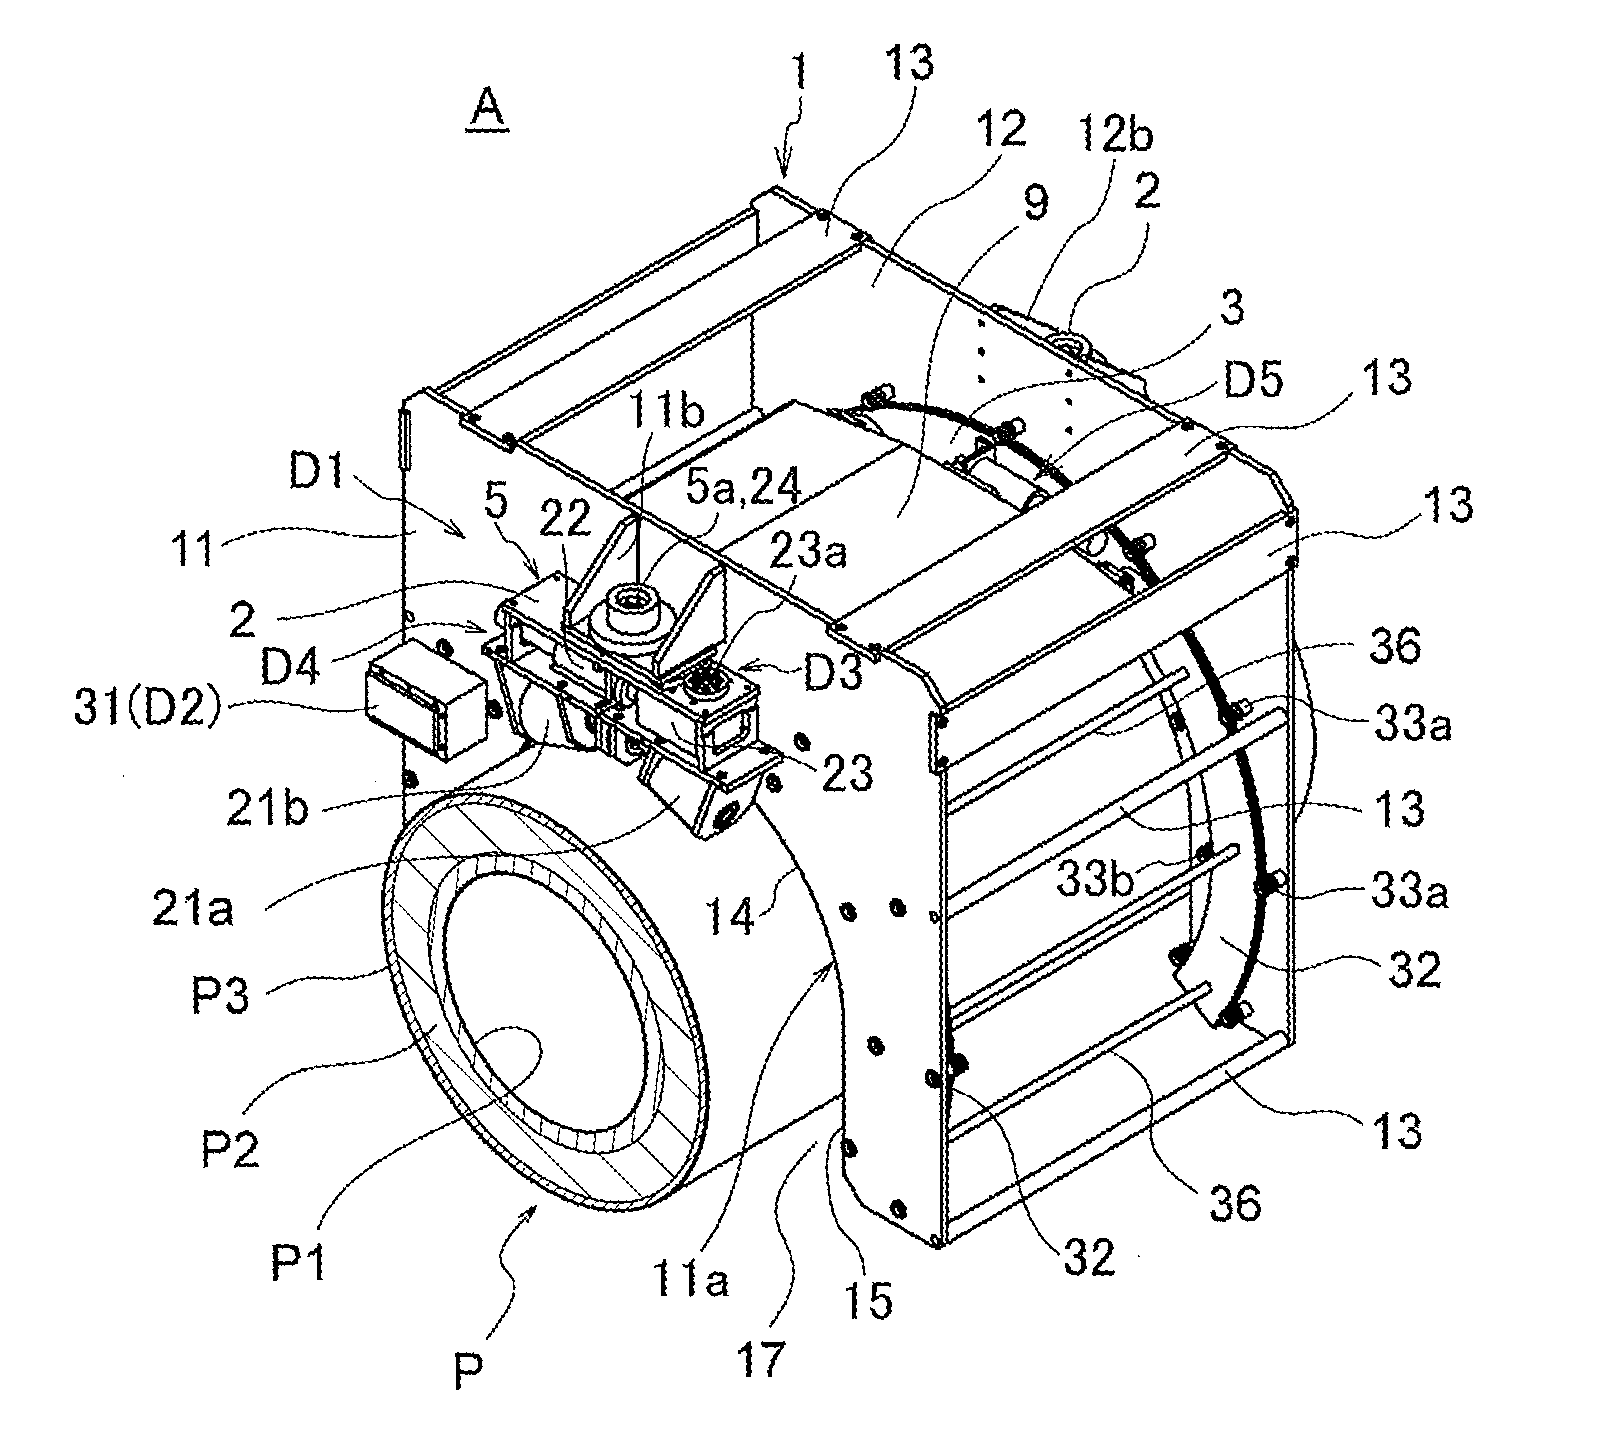 Piping inspection robot and method of inspecting piping